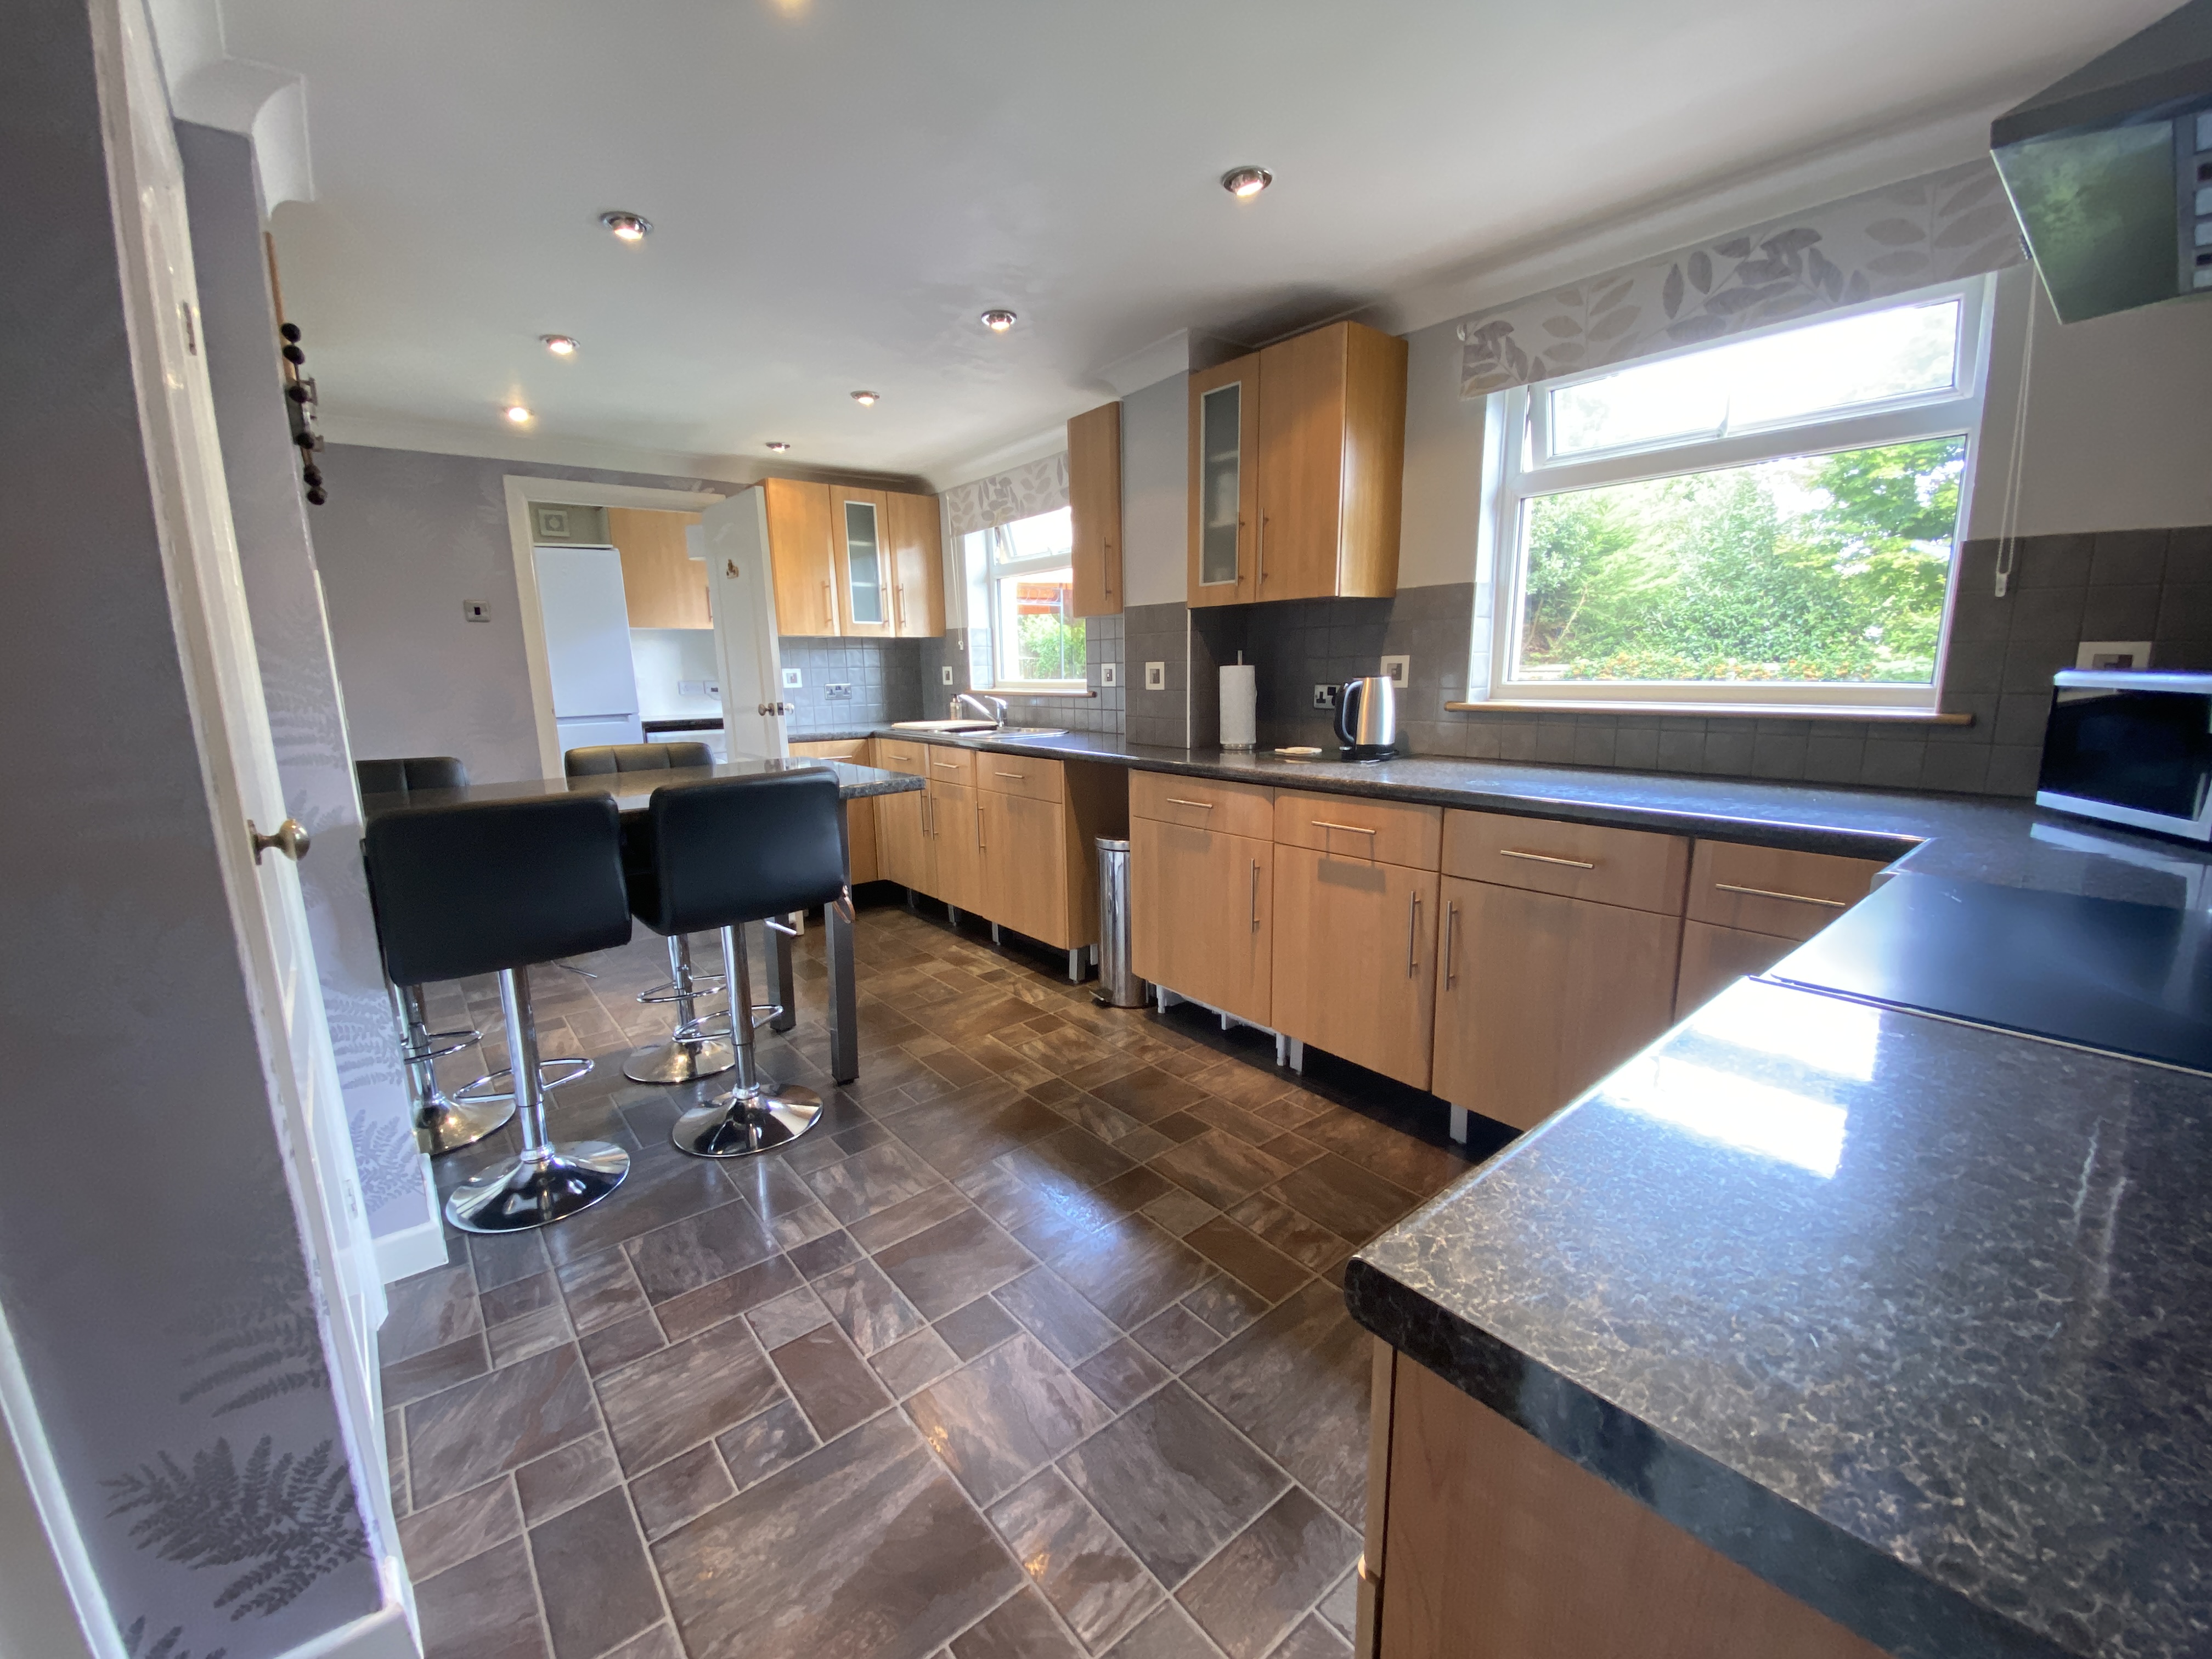 <p>Looking for a house with extra space but with a family feel? Then look no further than this ideal 4 bedroom family home. This place is perfect for growing families with the house only a few minute walk to Lordswood School. Along with being close to a major bus network.</p><p><br/><br/></p><p>This home features 3 reception rooms, a well sized kitchen with a breakfast bar, utility room and downstairs w/c. The garden has astroturf and has decking which runs across the width of the house.</p><p><br/><br/></p><p>Upstairs you have the main bedroom which is a good sized with an en-suite, you then have 3 further bedrooms with the family bathroom having a separate bath and shower.</p><p><br/><br/></p><p>The landlords have lived in this house for the past 30 years and have many memories and would like a family to come live here to create many more memories.</p><p><br/><br/></p><p>Property details:</p><p>EPC - C (77)</p><p>Council Tax - Band C - £1,696 per year</p><p>Minimum tenancy length - 6 months to begin but landlord is looking for a long term let</p><p><br/><br/></p><p>Landlord details:</p><p>Pet friendly</p><p>Holding Deposit £368.53</p><p>Deposit £1,842.69</p><p>Available Now</p><p><br/><br/></p><p>Houses like this aren’t very often available to rent so if you are interested book your viewing today</p>